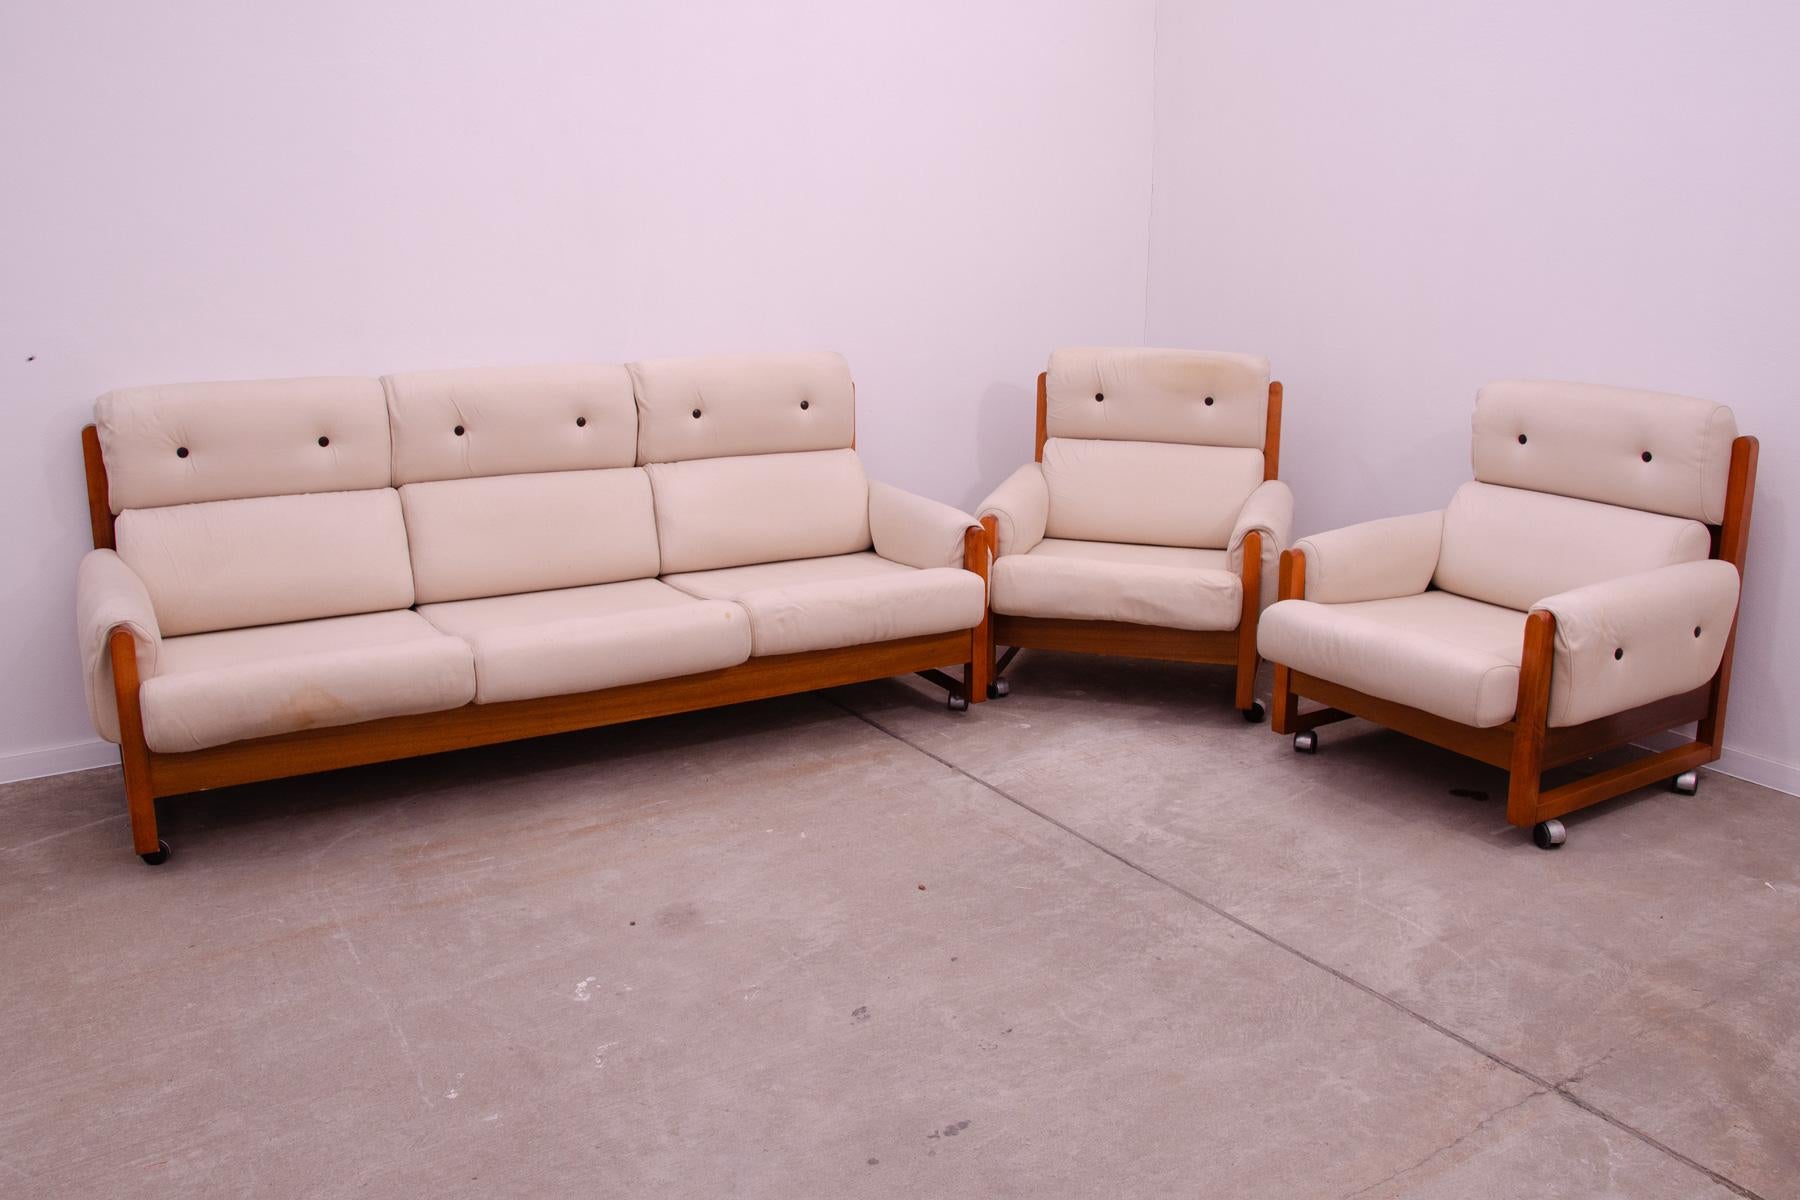 This lounge Scandinavian style living room set was made in the 1970´s in the former Czechoslovakia. Consists of one sofa and two armchairs. The set is upholstered with fabric. The structure is made of beech wood and the furniture stands on metal